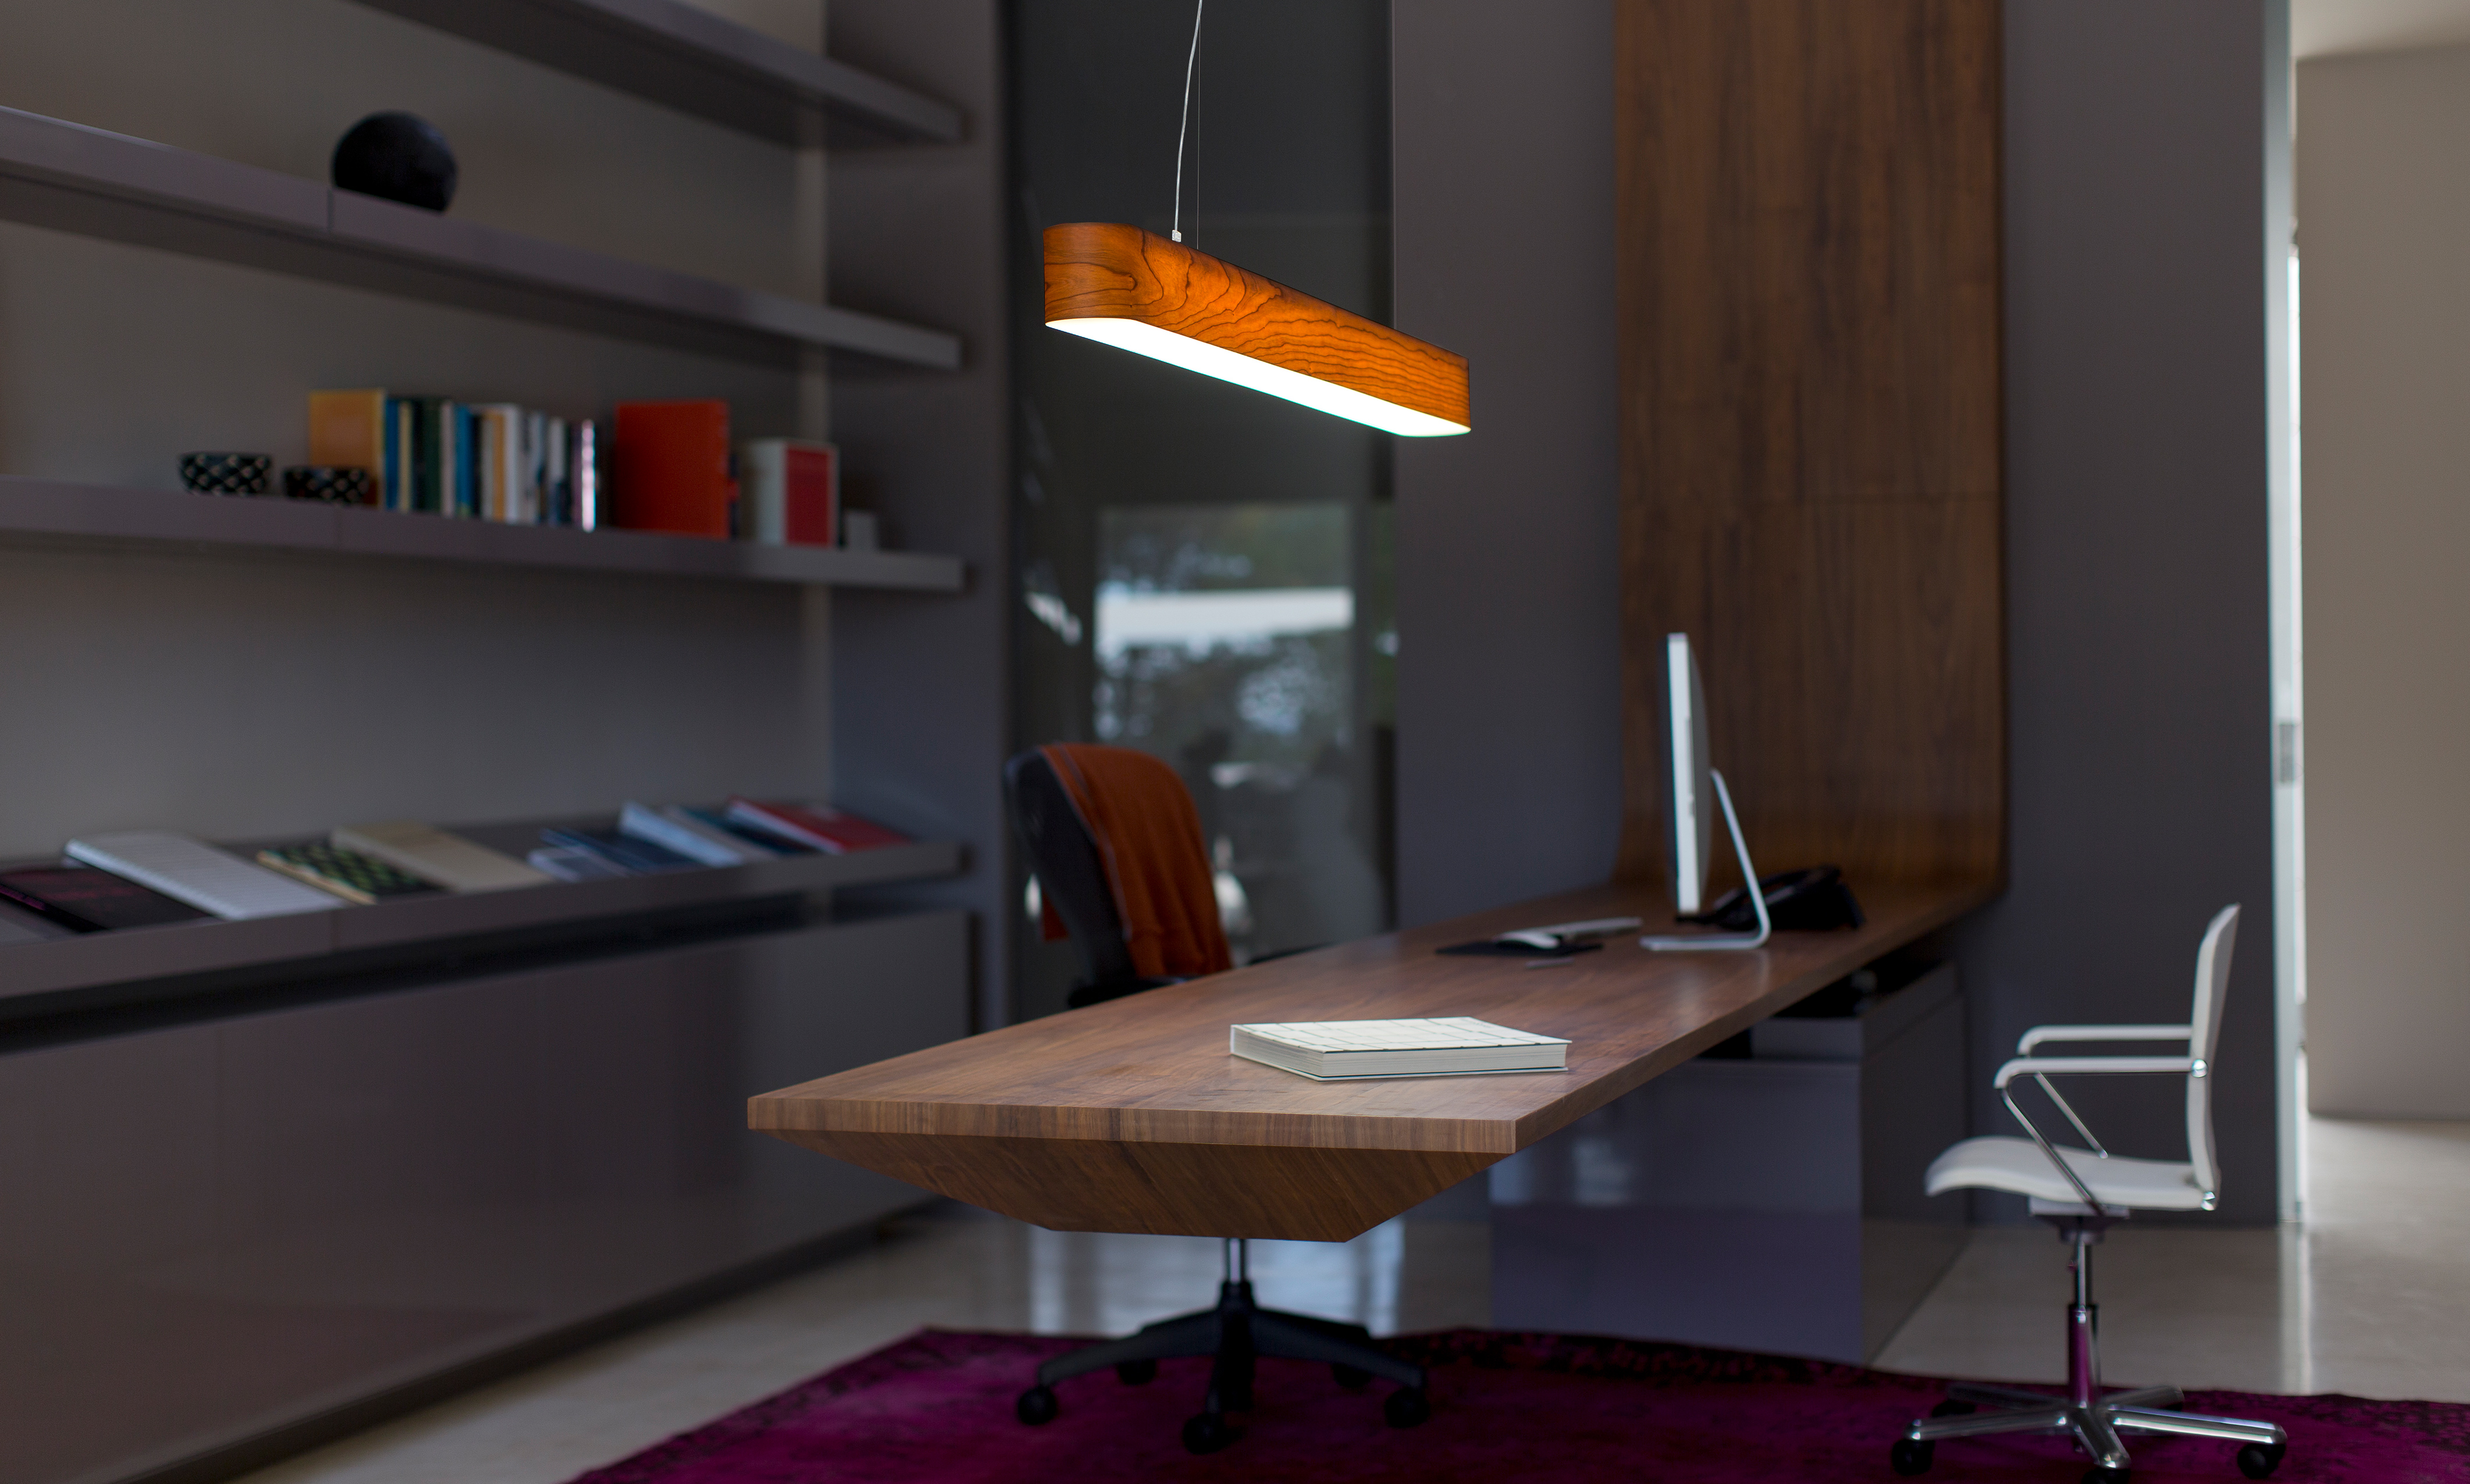 LZF Lamps | I-Club, Slim Suspension Lamp. Effortless study, by A-cero Architects | Wood touched by Light | Handmade Wood Lighting since 1994